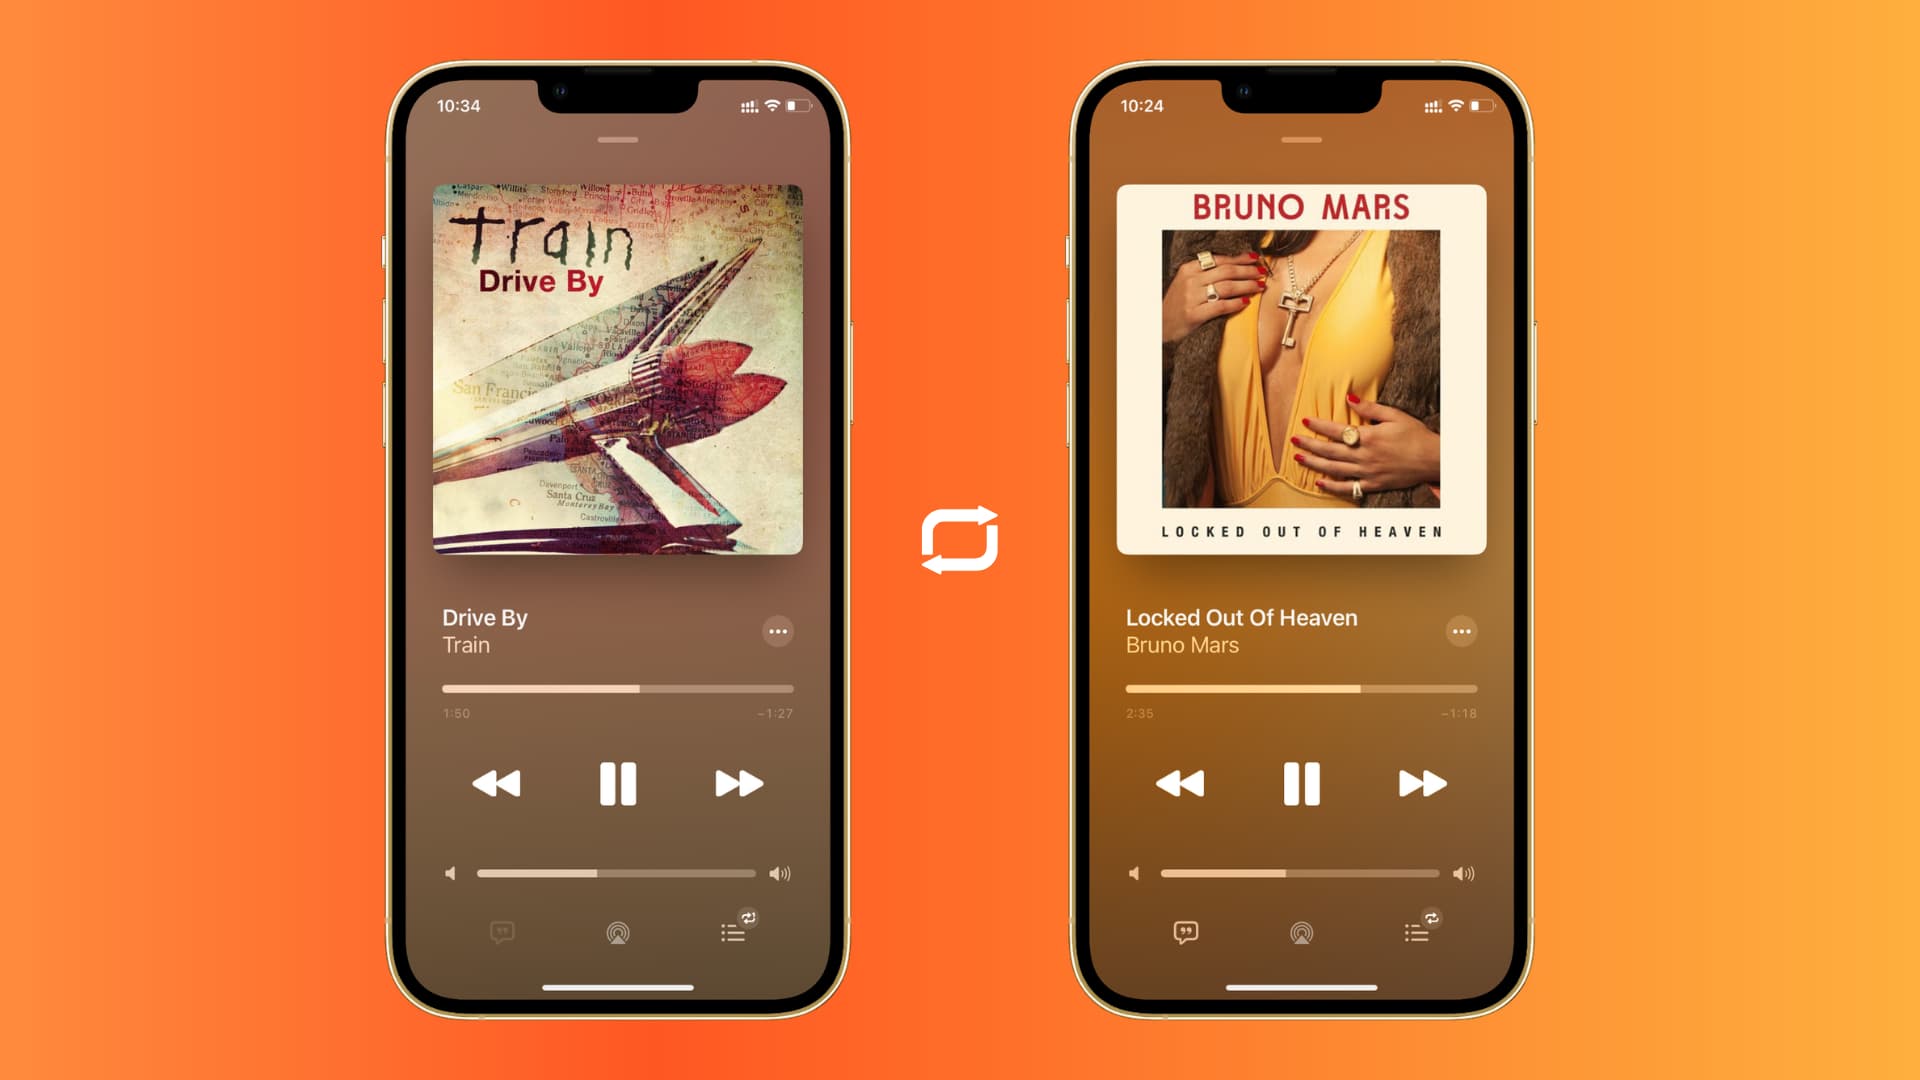 Turn off repeat songs in the Music app on iPhone